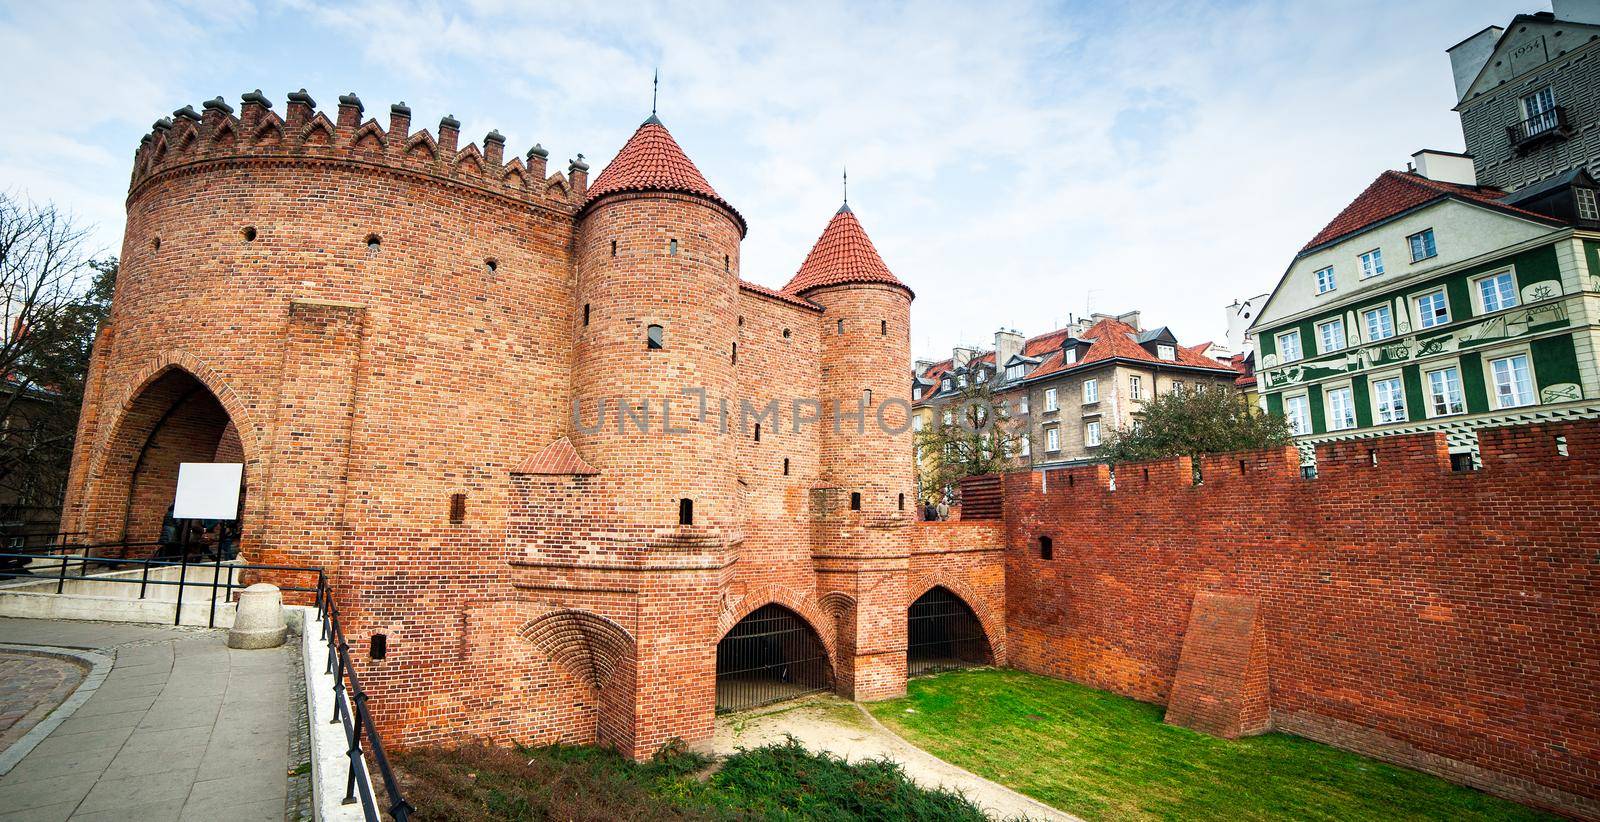 Barbican fortress in the historic center of Warsaw